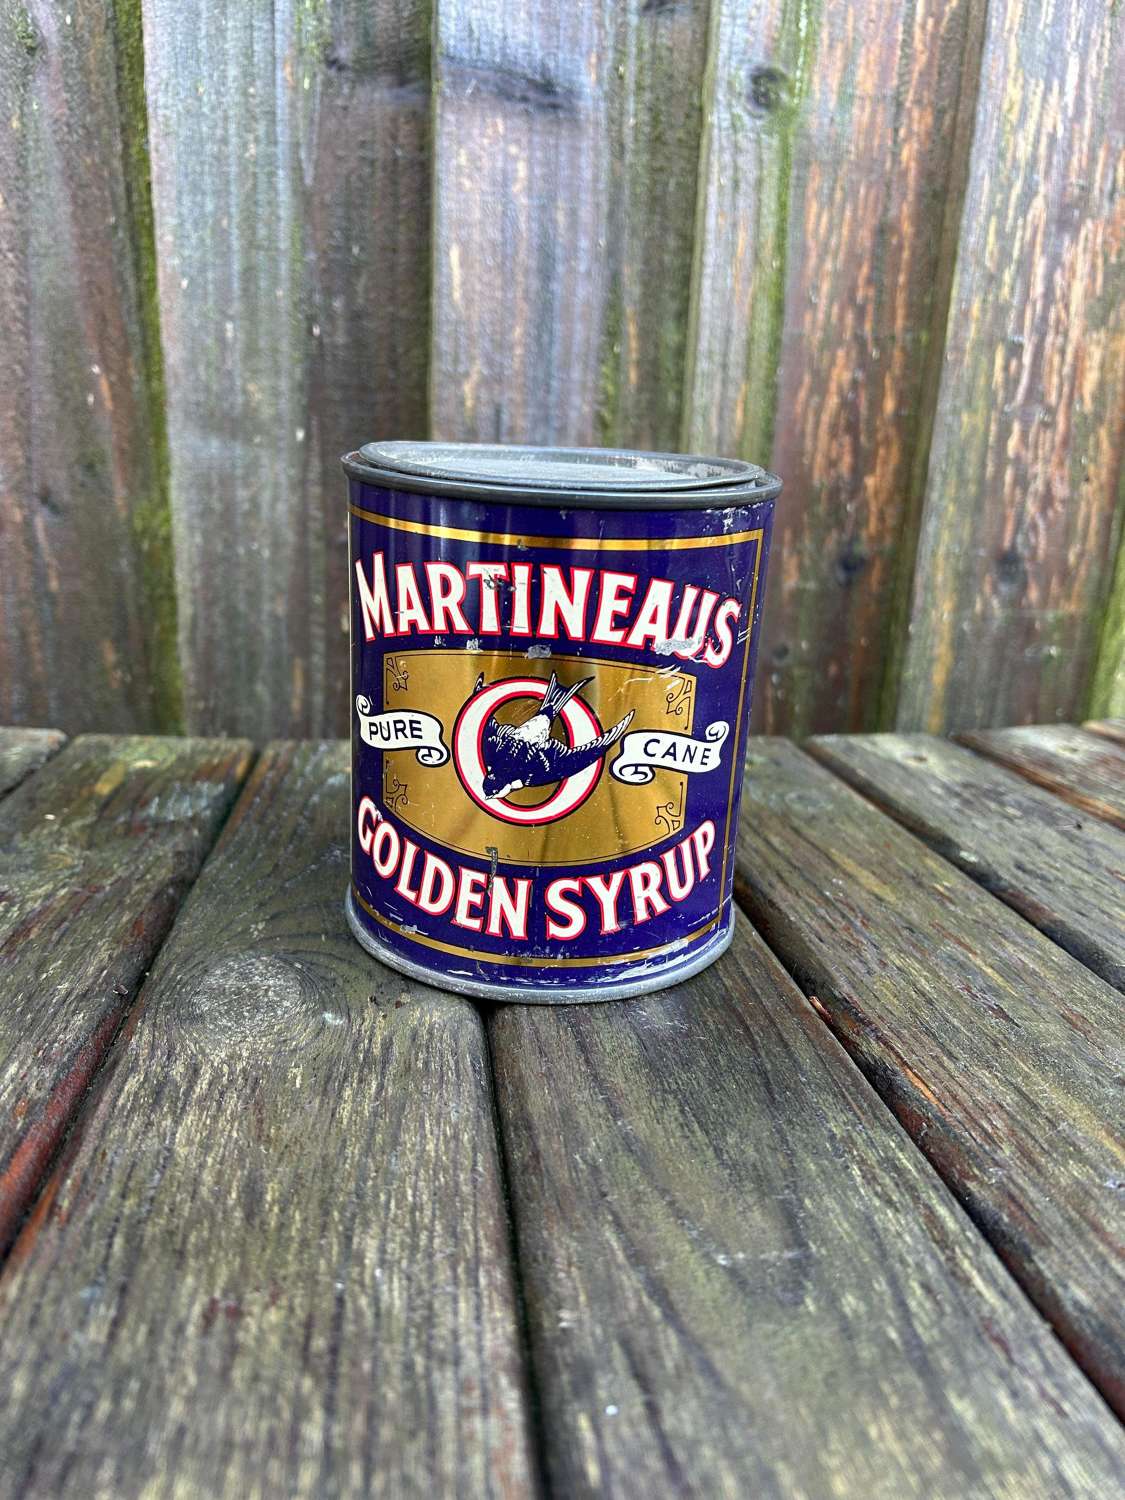 Unusual golden syrup tin